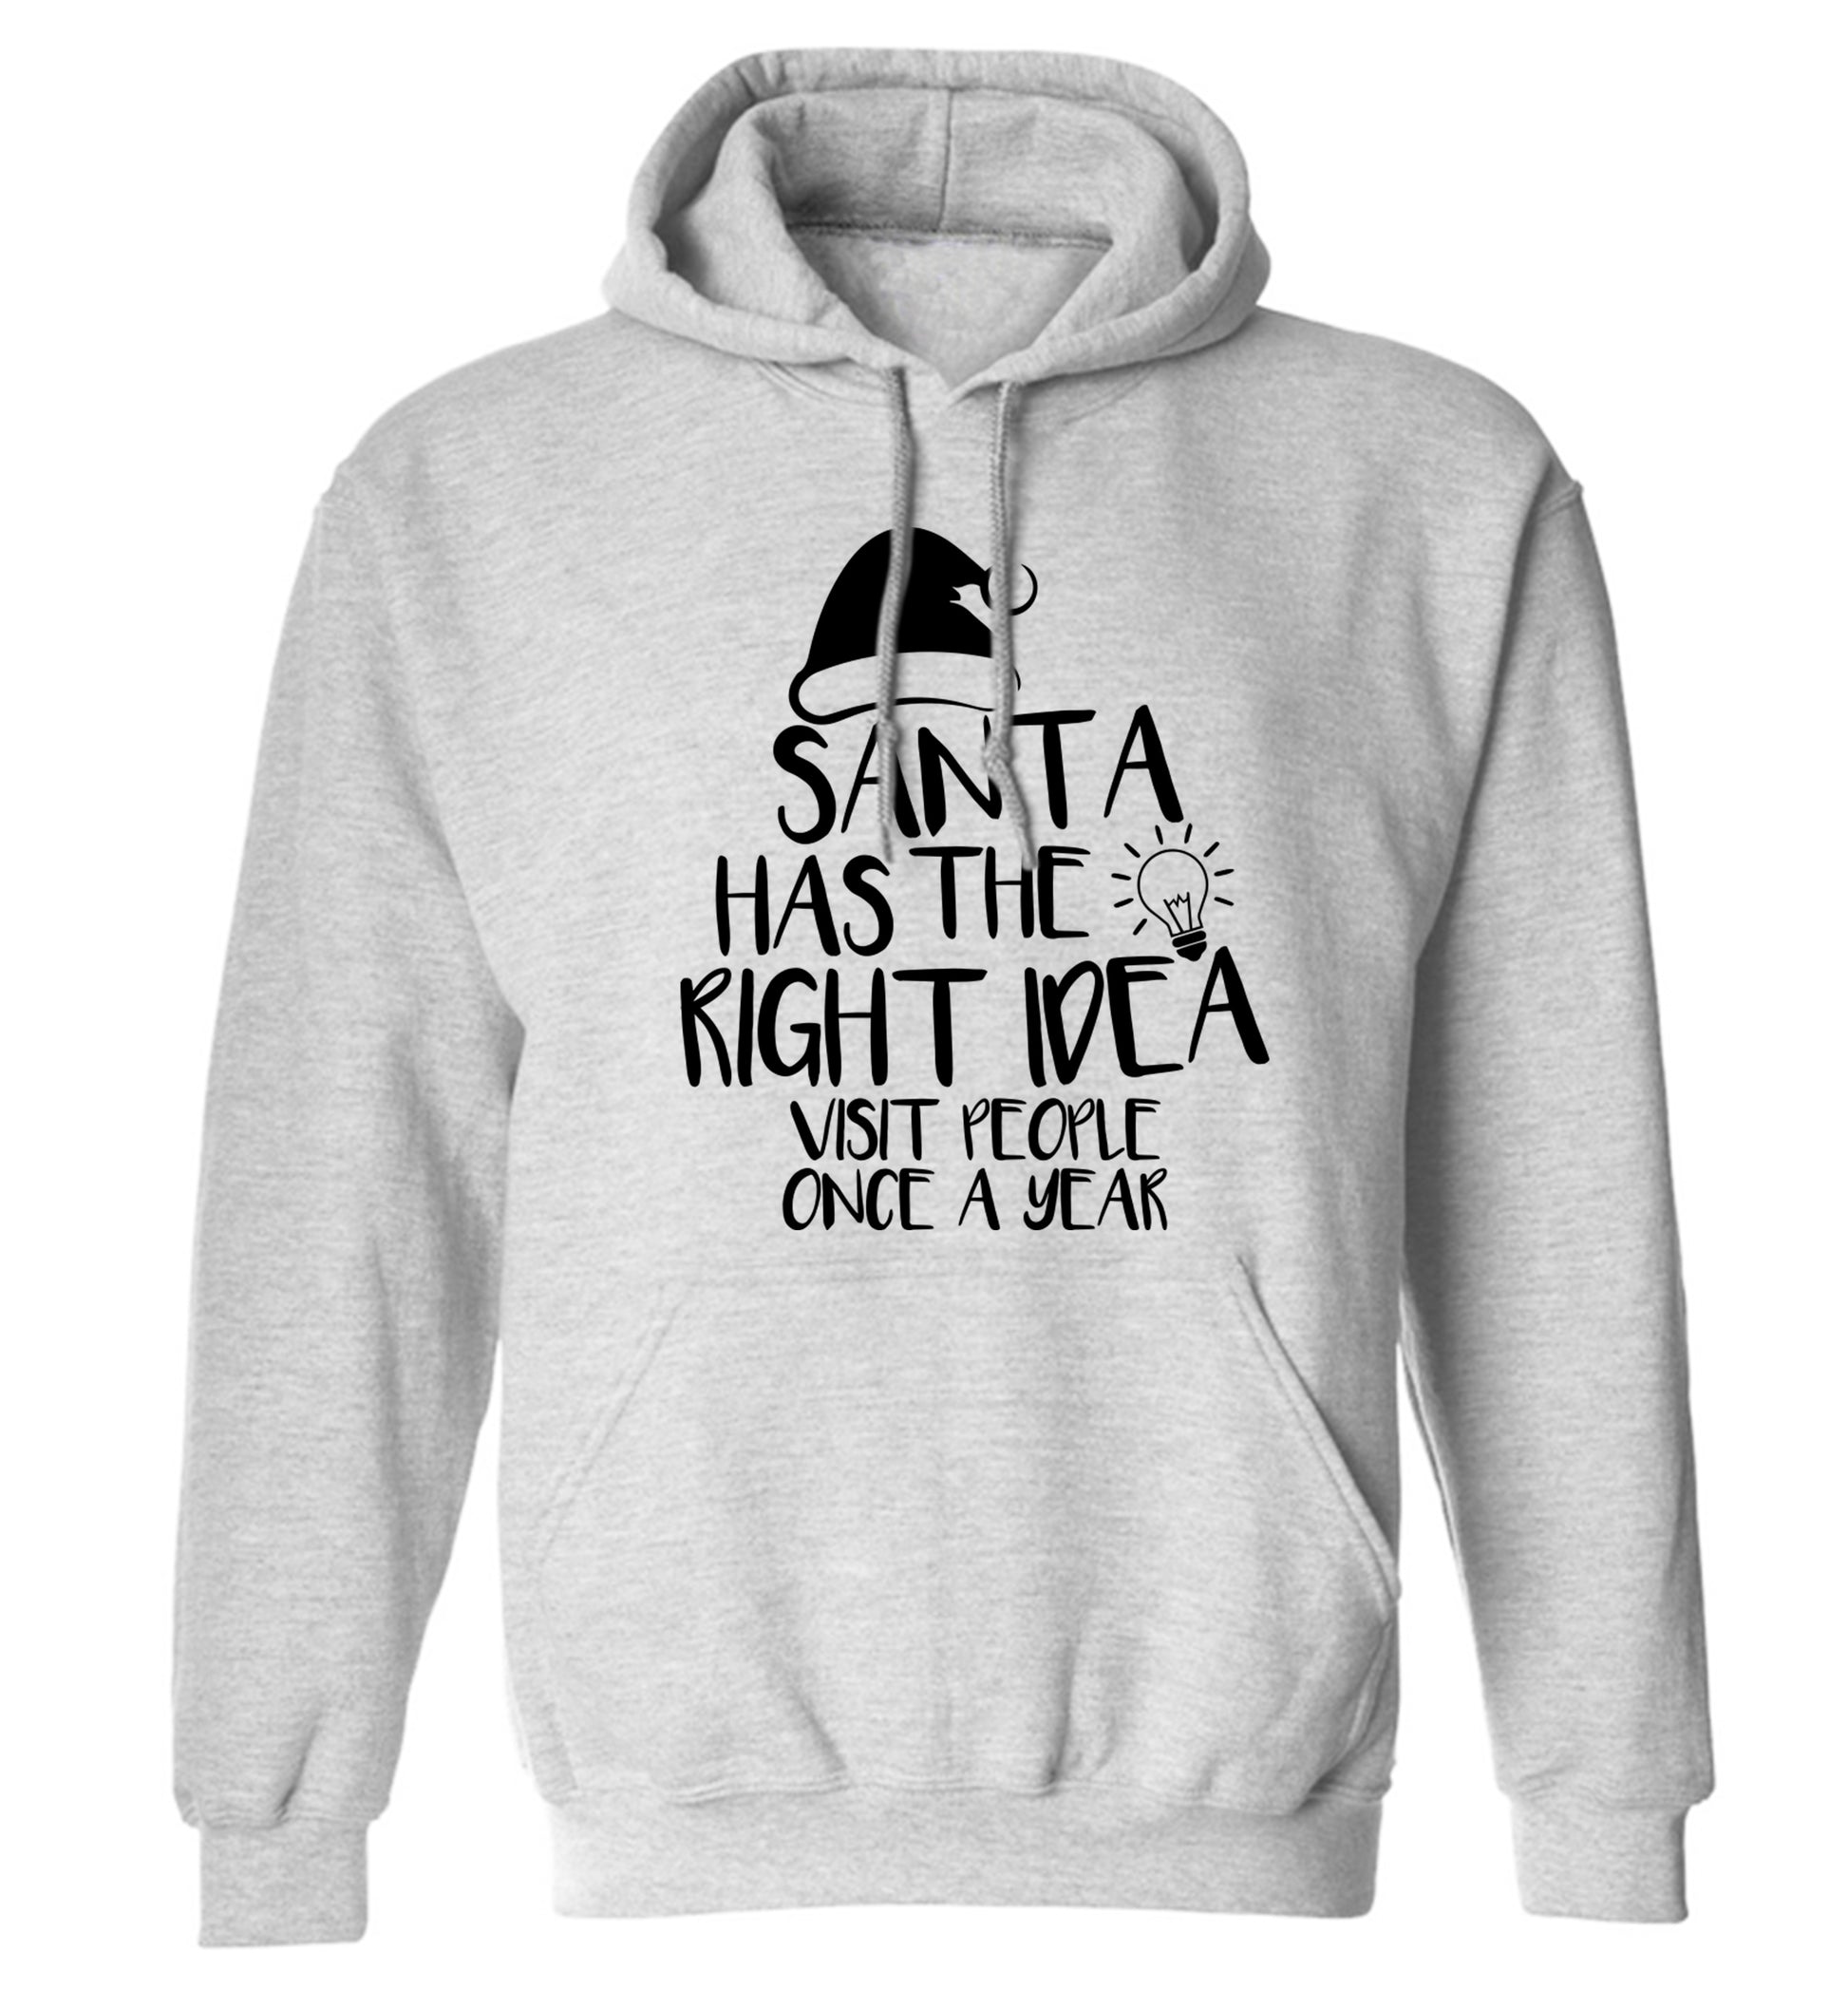 Santa has the right idea visit people once a year adults unisex grey hoodie 2XL